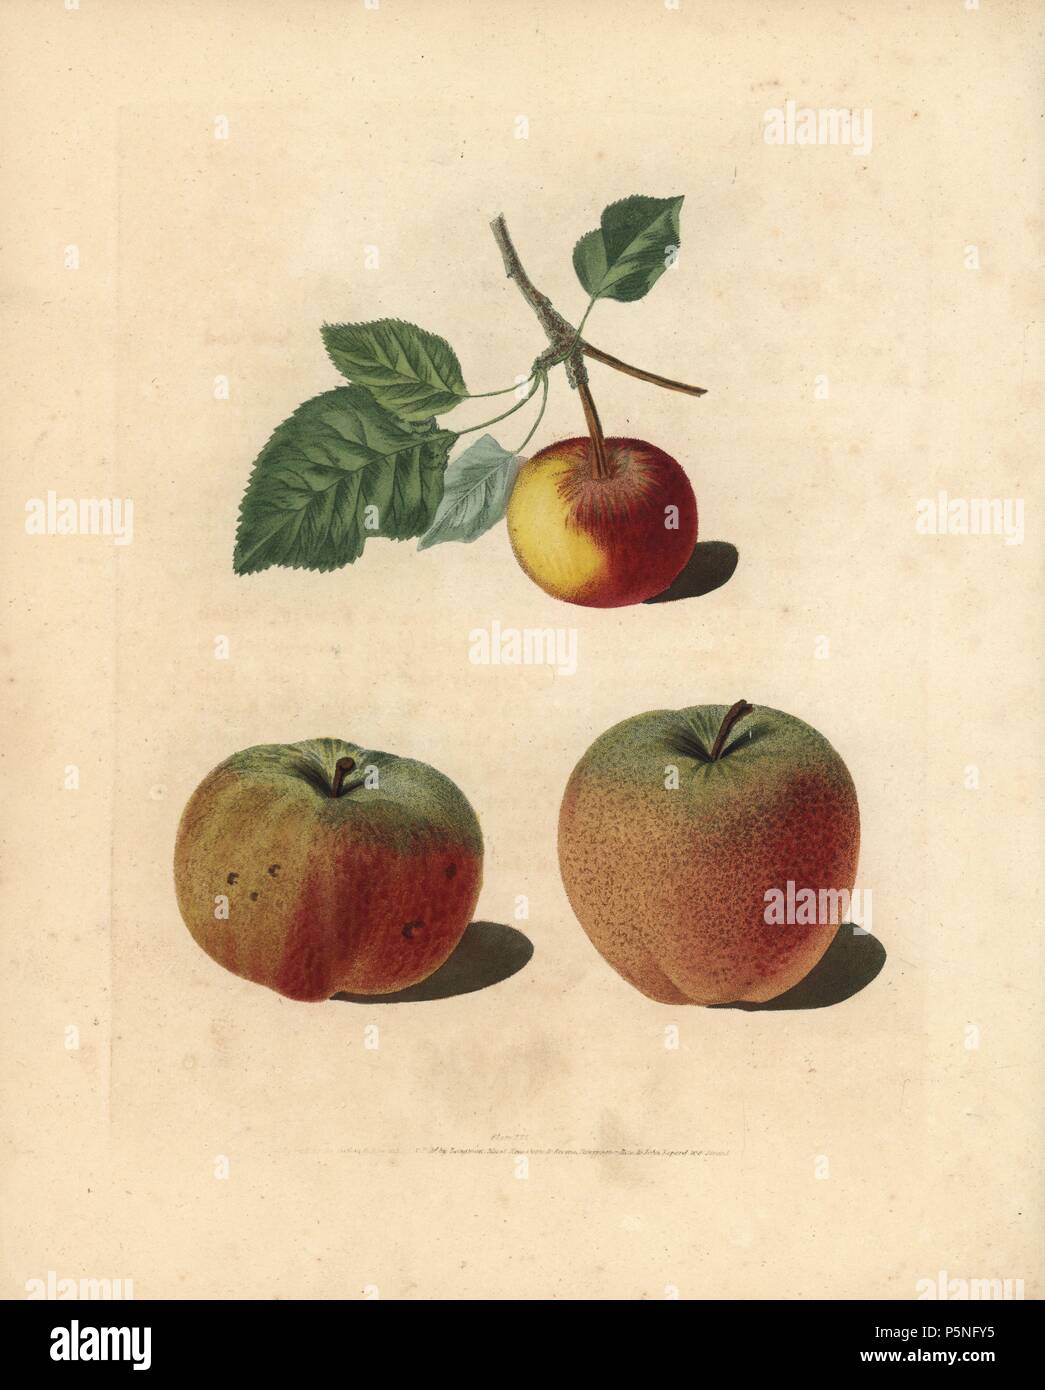 Apple varieties, Malus domestica: Pomme d'Api, Padly's Pippin and Bigg's Nonsuch. Handcoloured stipple engraving of an illustration by George Brookshaw from his own 'Pomona Britannica,' London, Longman, Hurst, etc., 1817. The quarto edition of the original folio edition published from 1804-1812. Brookshaw (1751-1823) was a successful cabinet maker who disappeared in the 1790s before returning as a flower painter with the anonymous 'New Treatise on Flower Painting,' 1797. Stock Photo